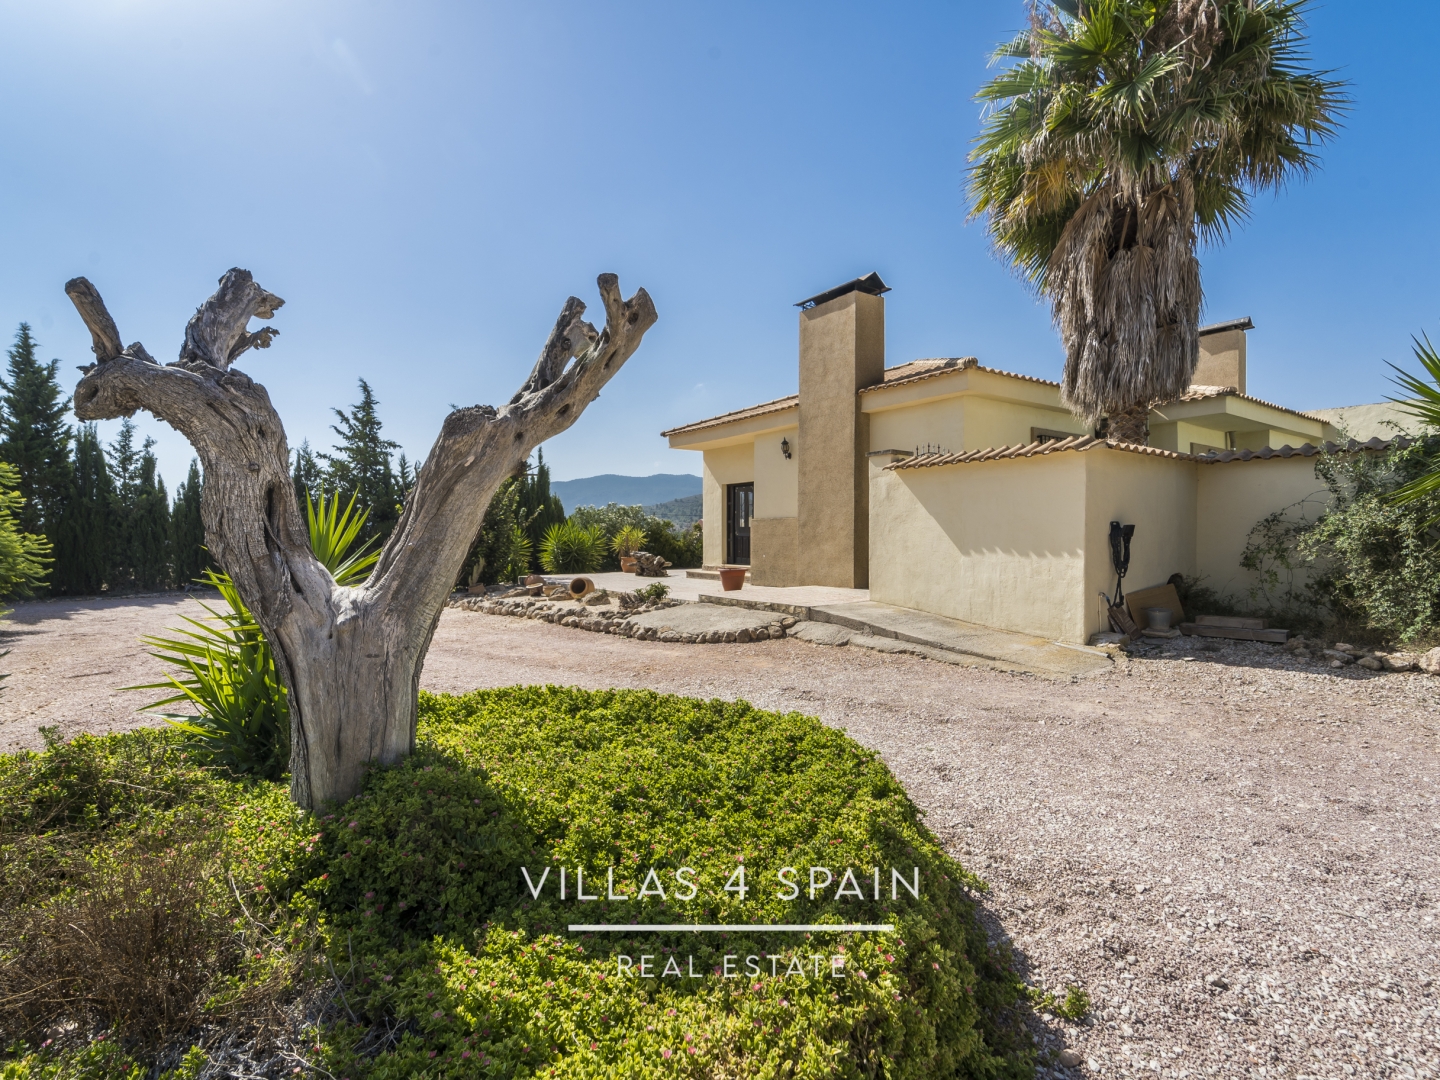 Villa with guest house and equestrian stables